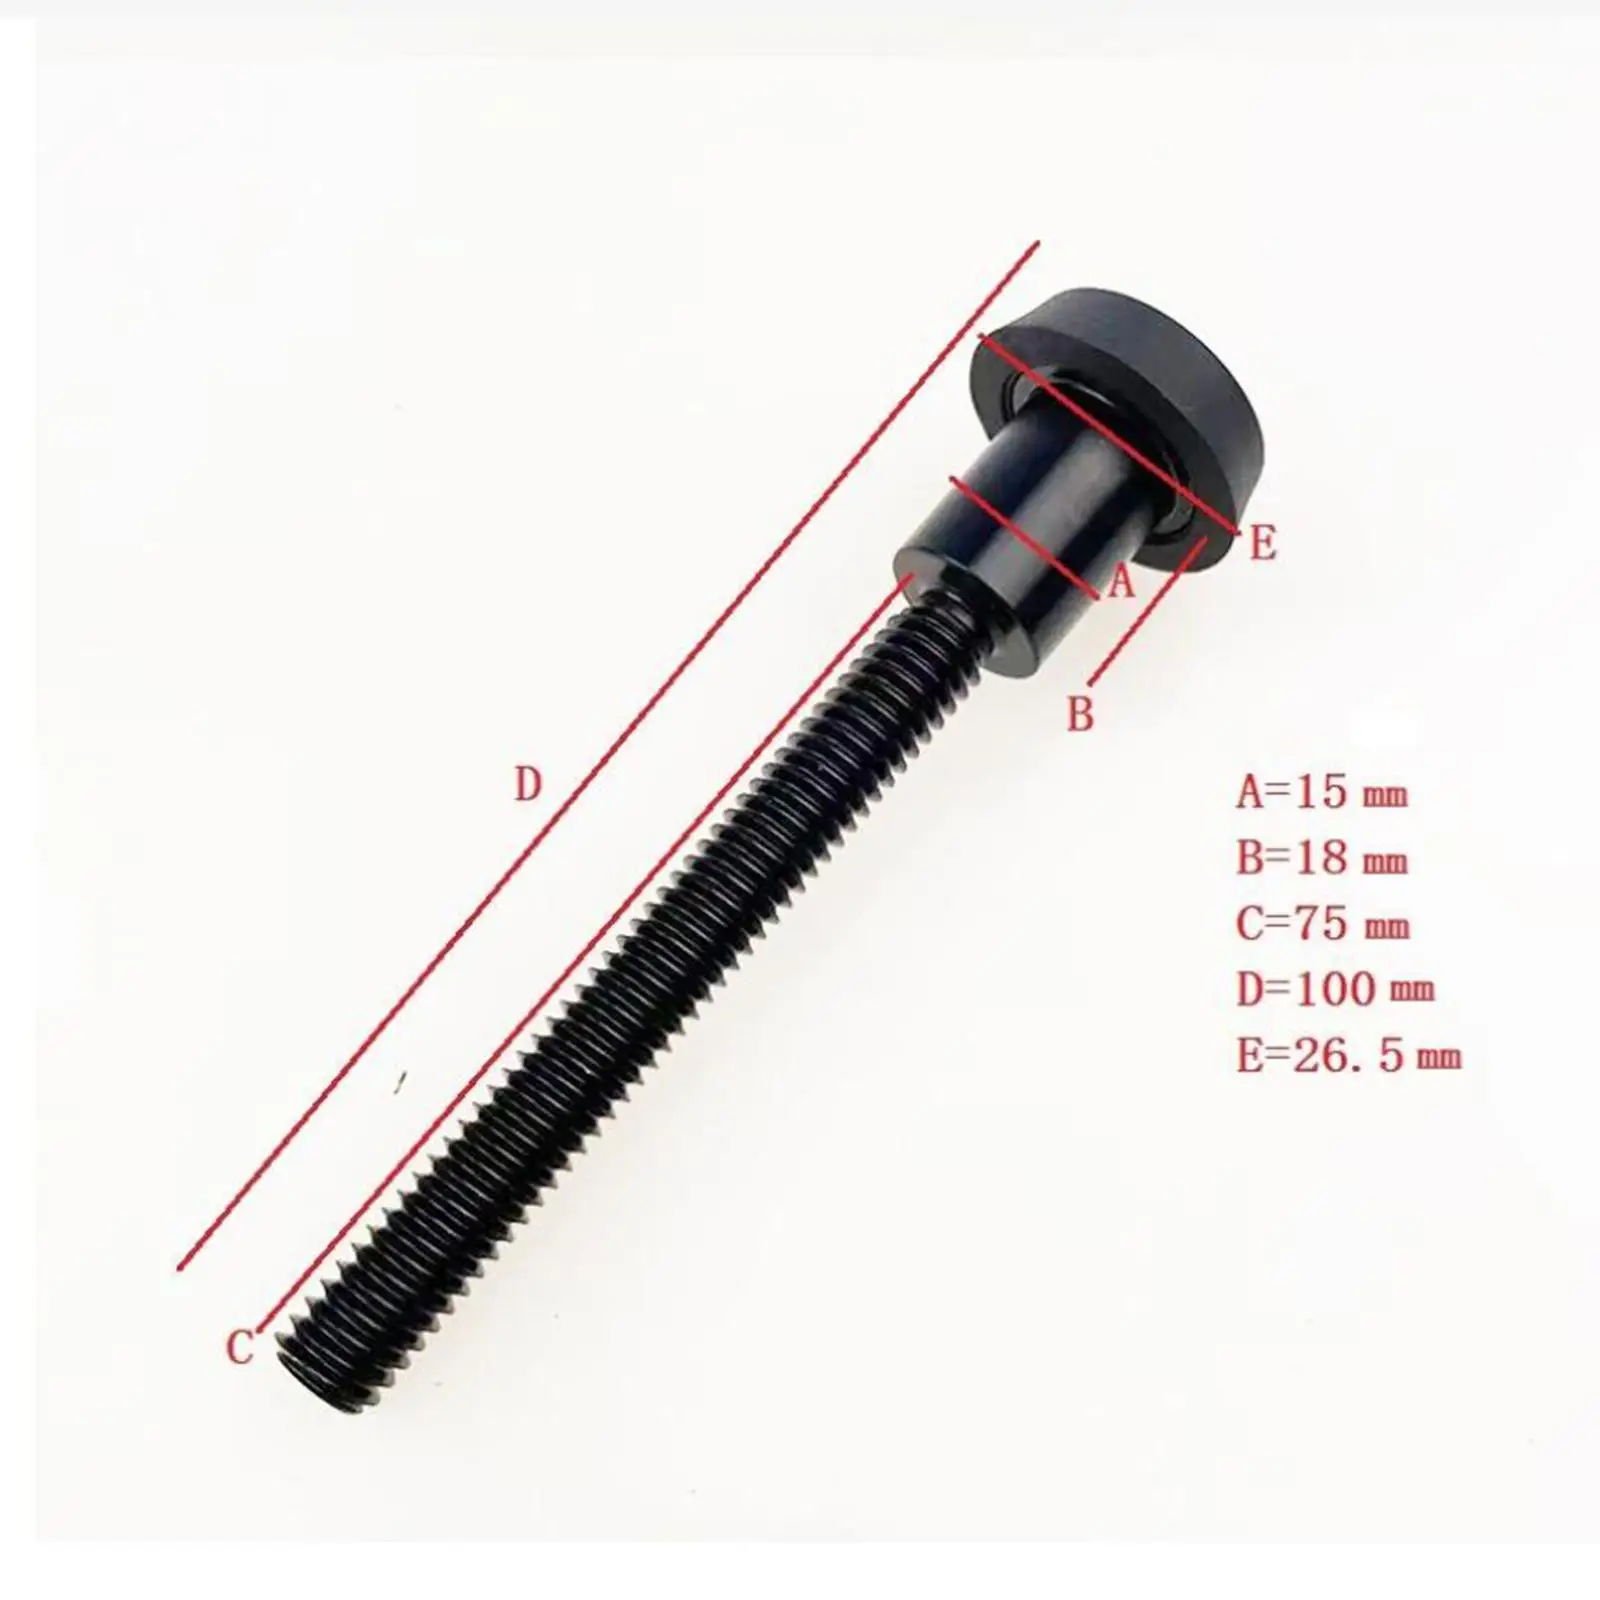 Billiard Cue Extension Bumper Pool Cue Extension Connected Back Plug Screw Replacement Part for Billiard Cue